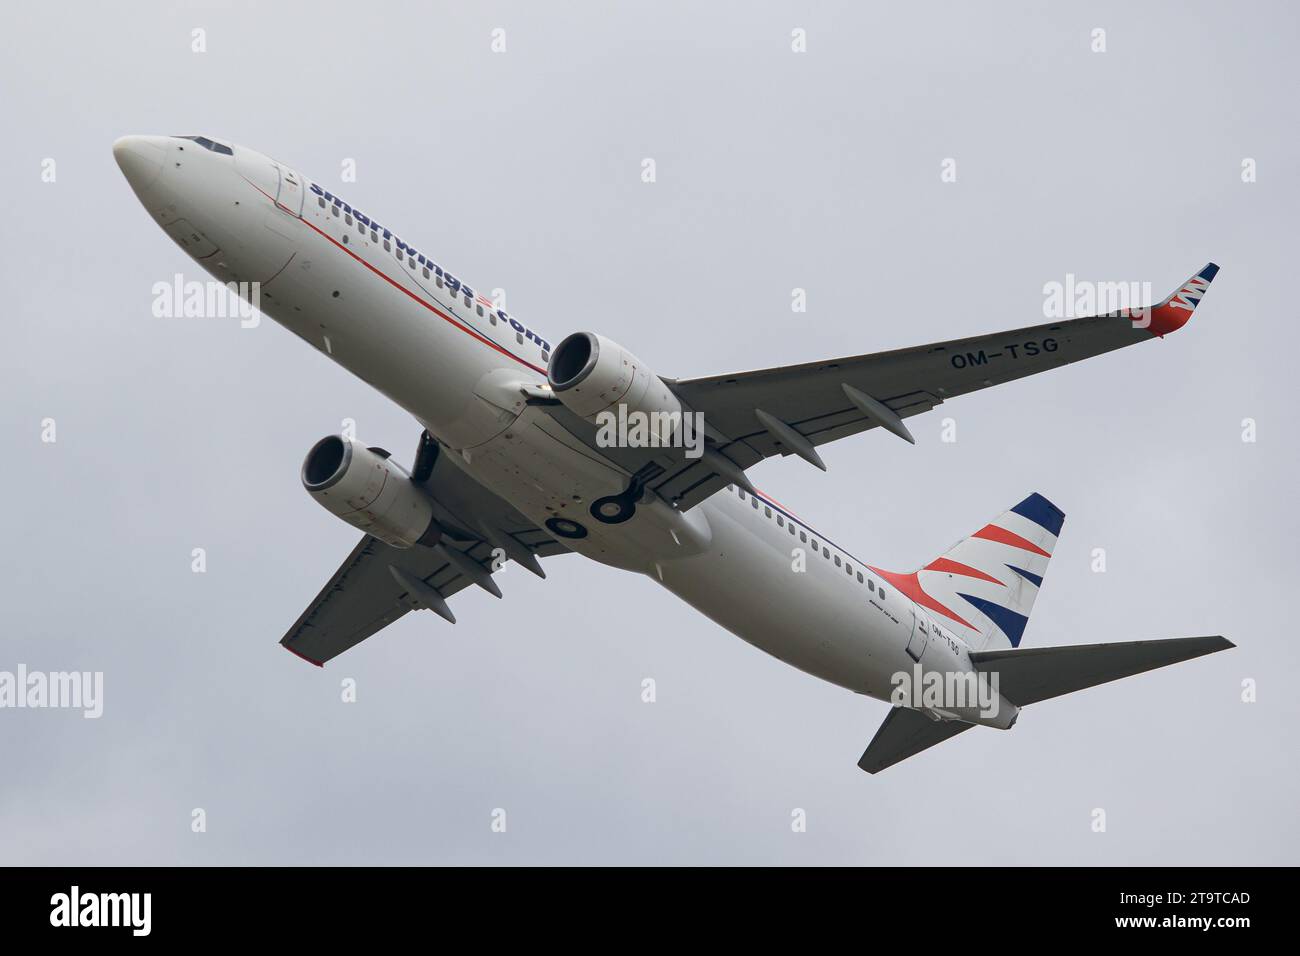 Czech airline Smartwings Boeing 737-800 taking off from Lviv Airport Stock Photo